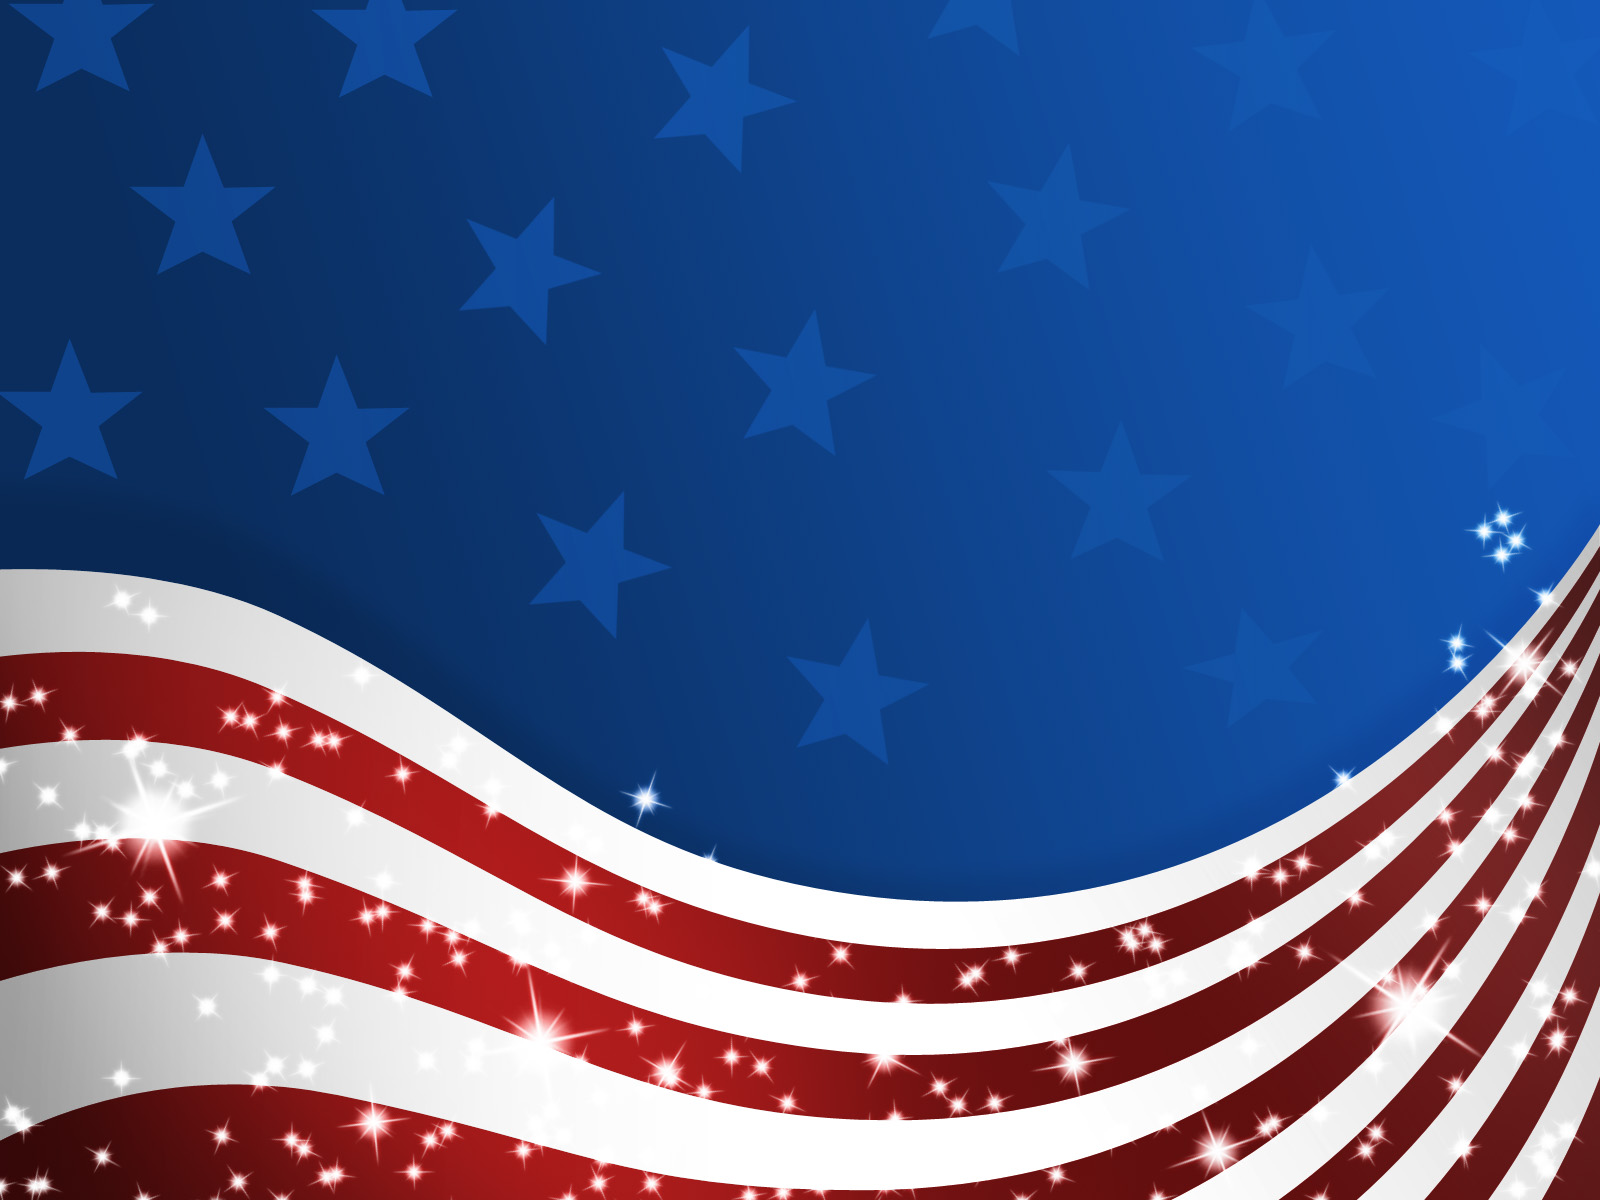 Cool Patriotic Background Images & Pictures - Becuo